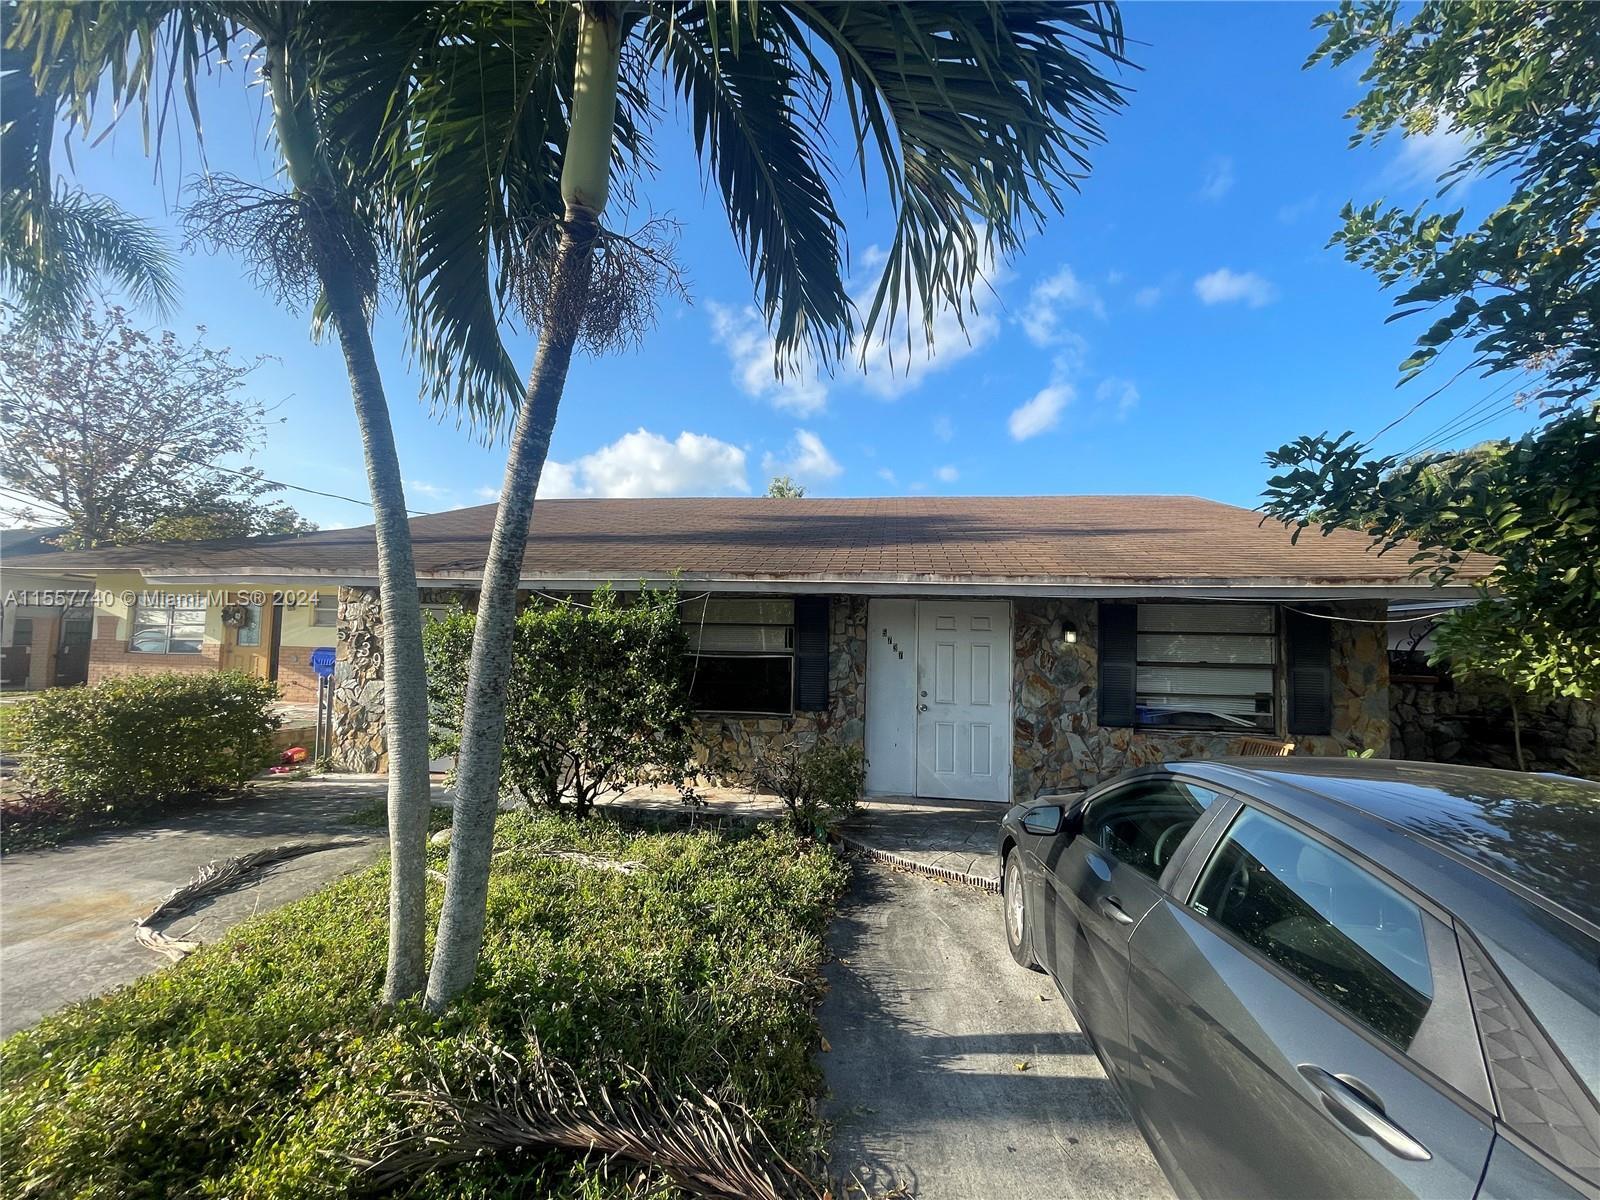 Photo of 5737 Hayes St #5737 in Hollywood, FL